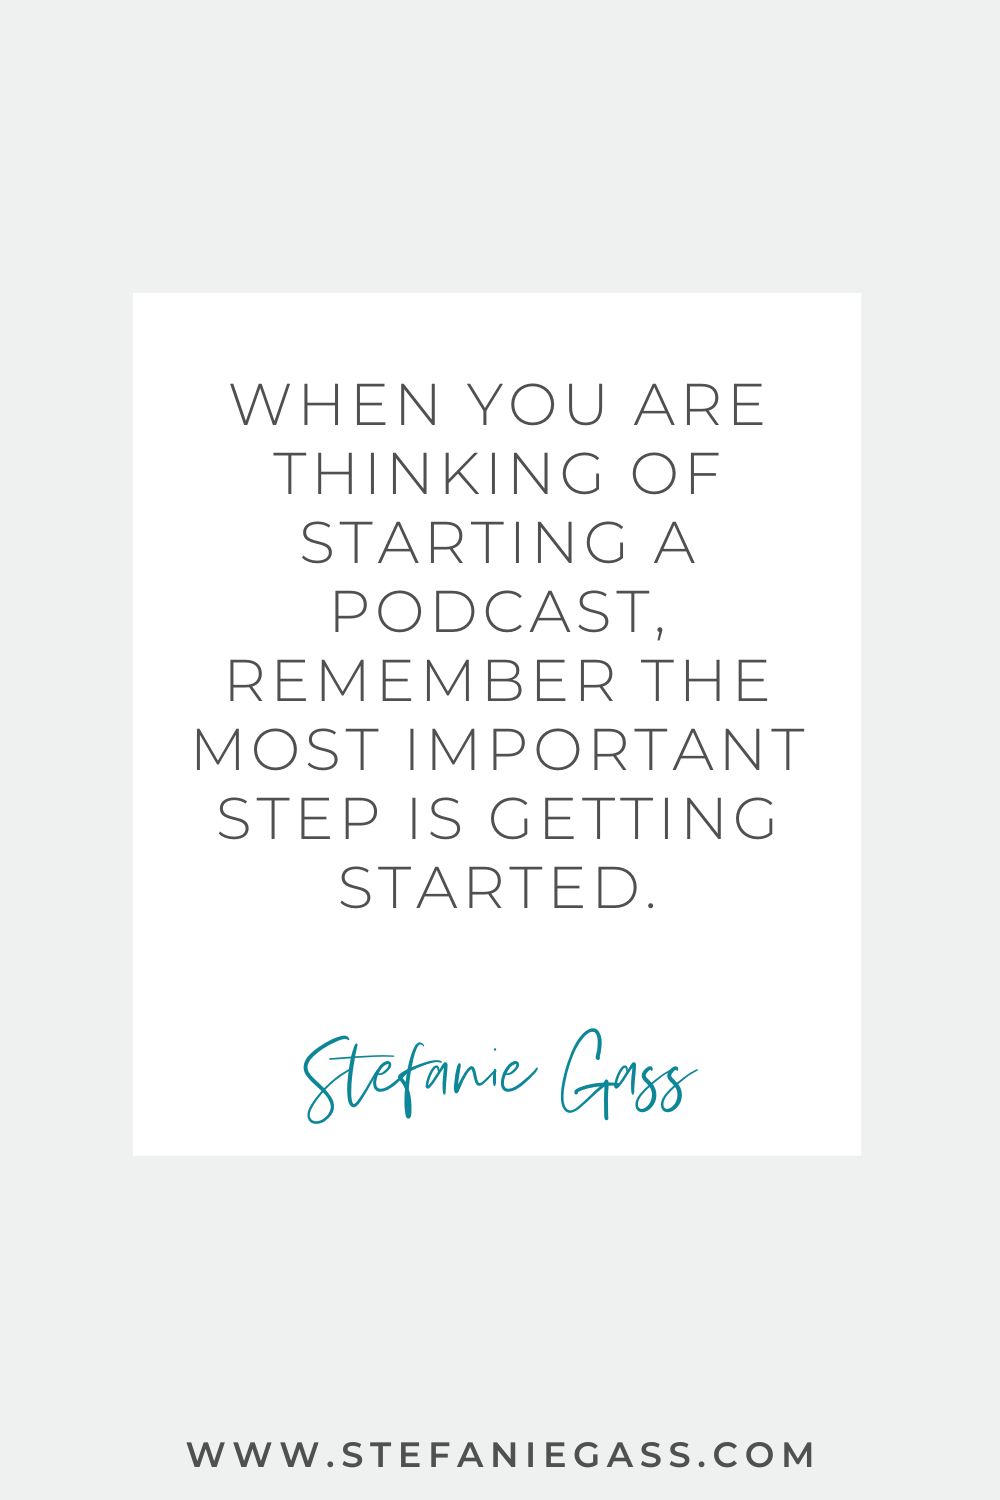 Stefanie Gass Quote: When you are thinking of starting a podcast, remember the most important step is getting started.